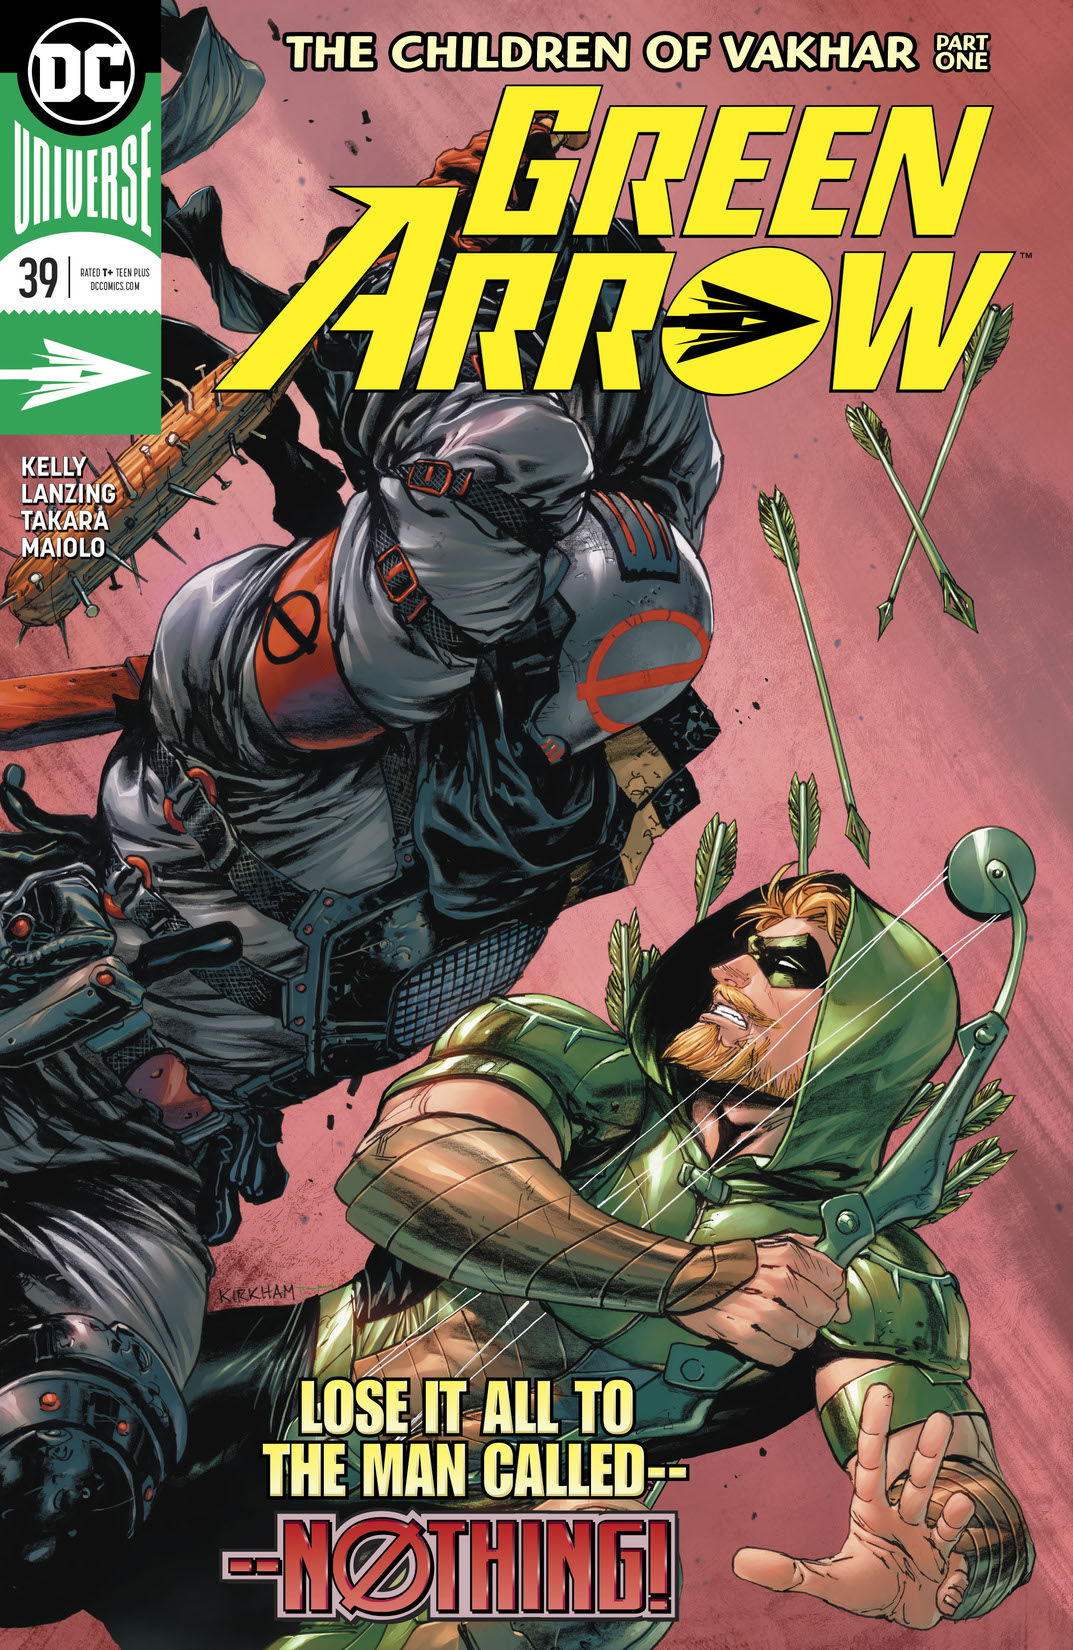 Green Arrow (2016-) #39 preview images